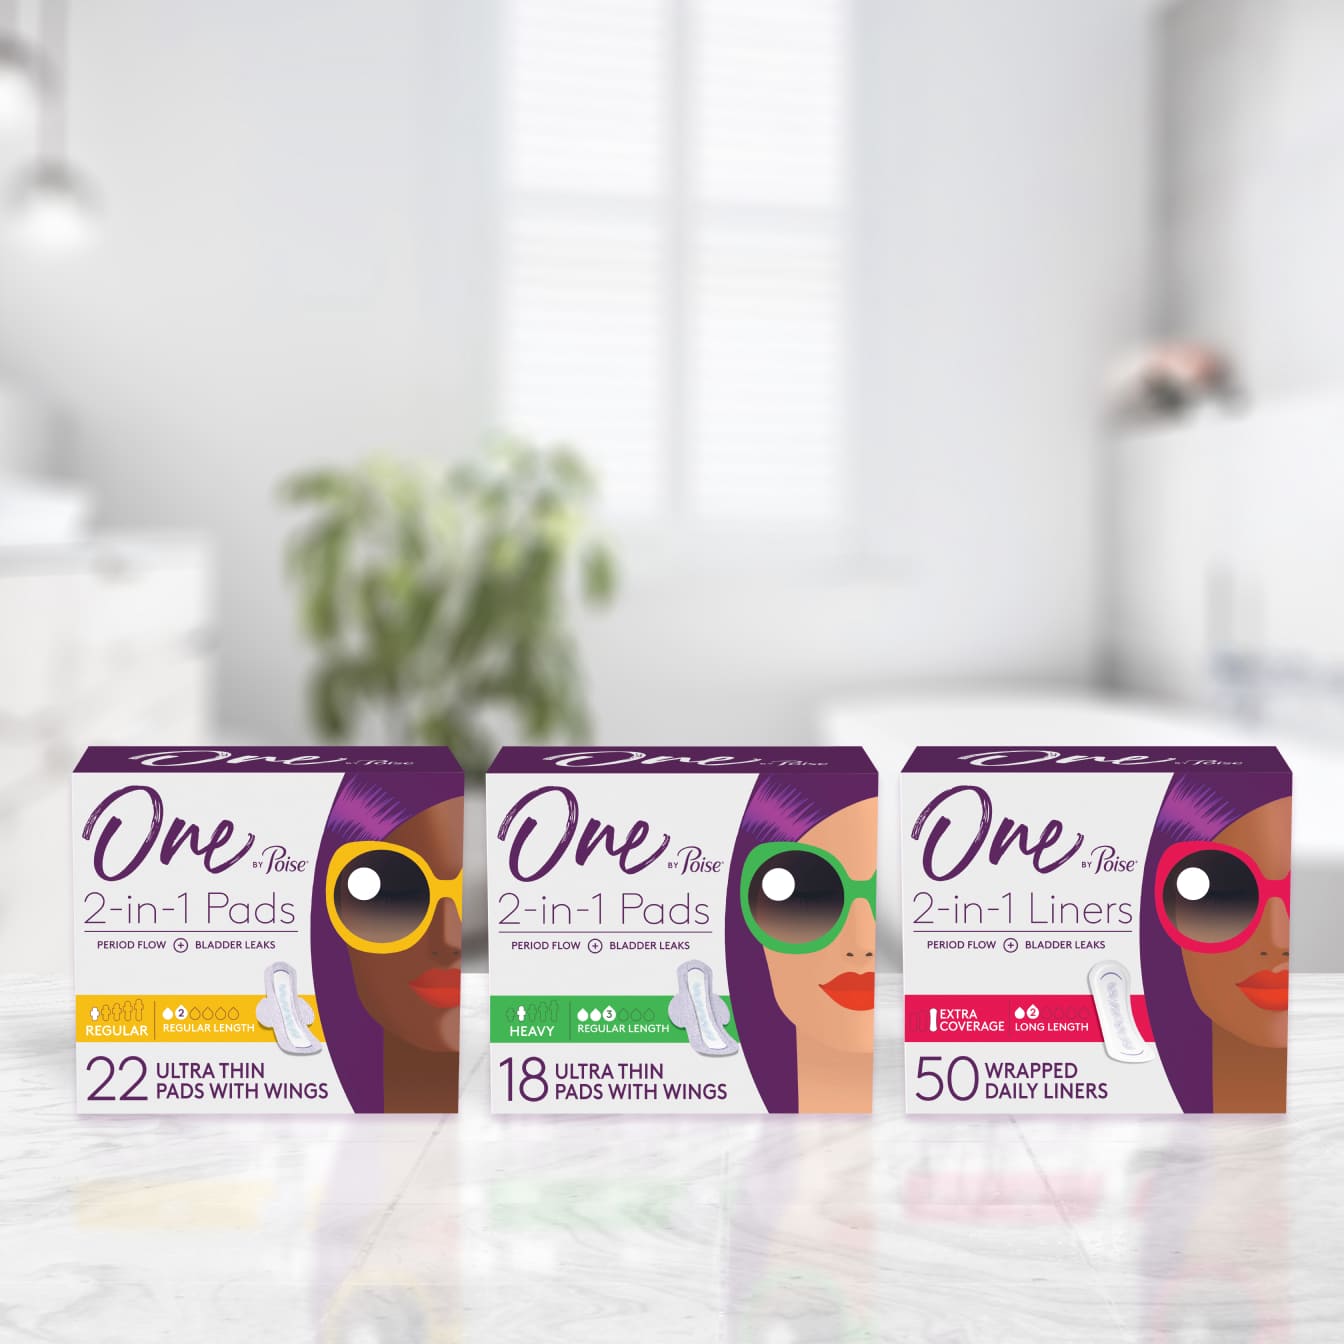 One by Poise Panty Liners (2-in-1 Period & Bladder Leakage Daily Liner),  Long, Extra Coverage for Period Flow, Very Light Absorbency for Bladder